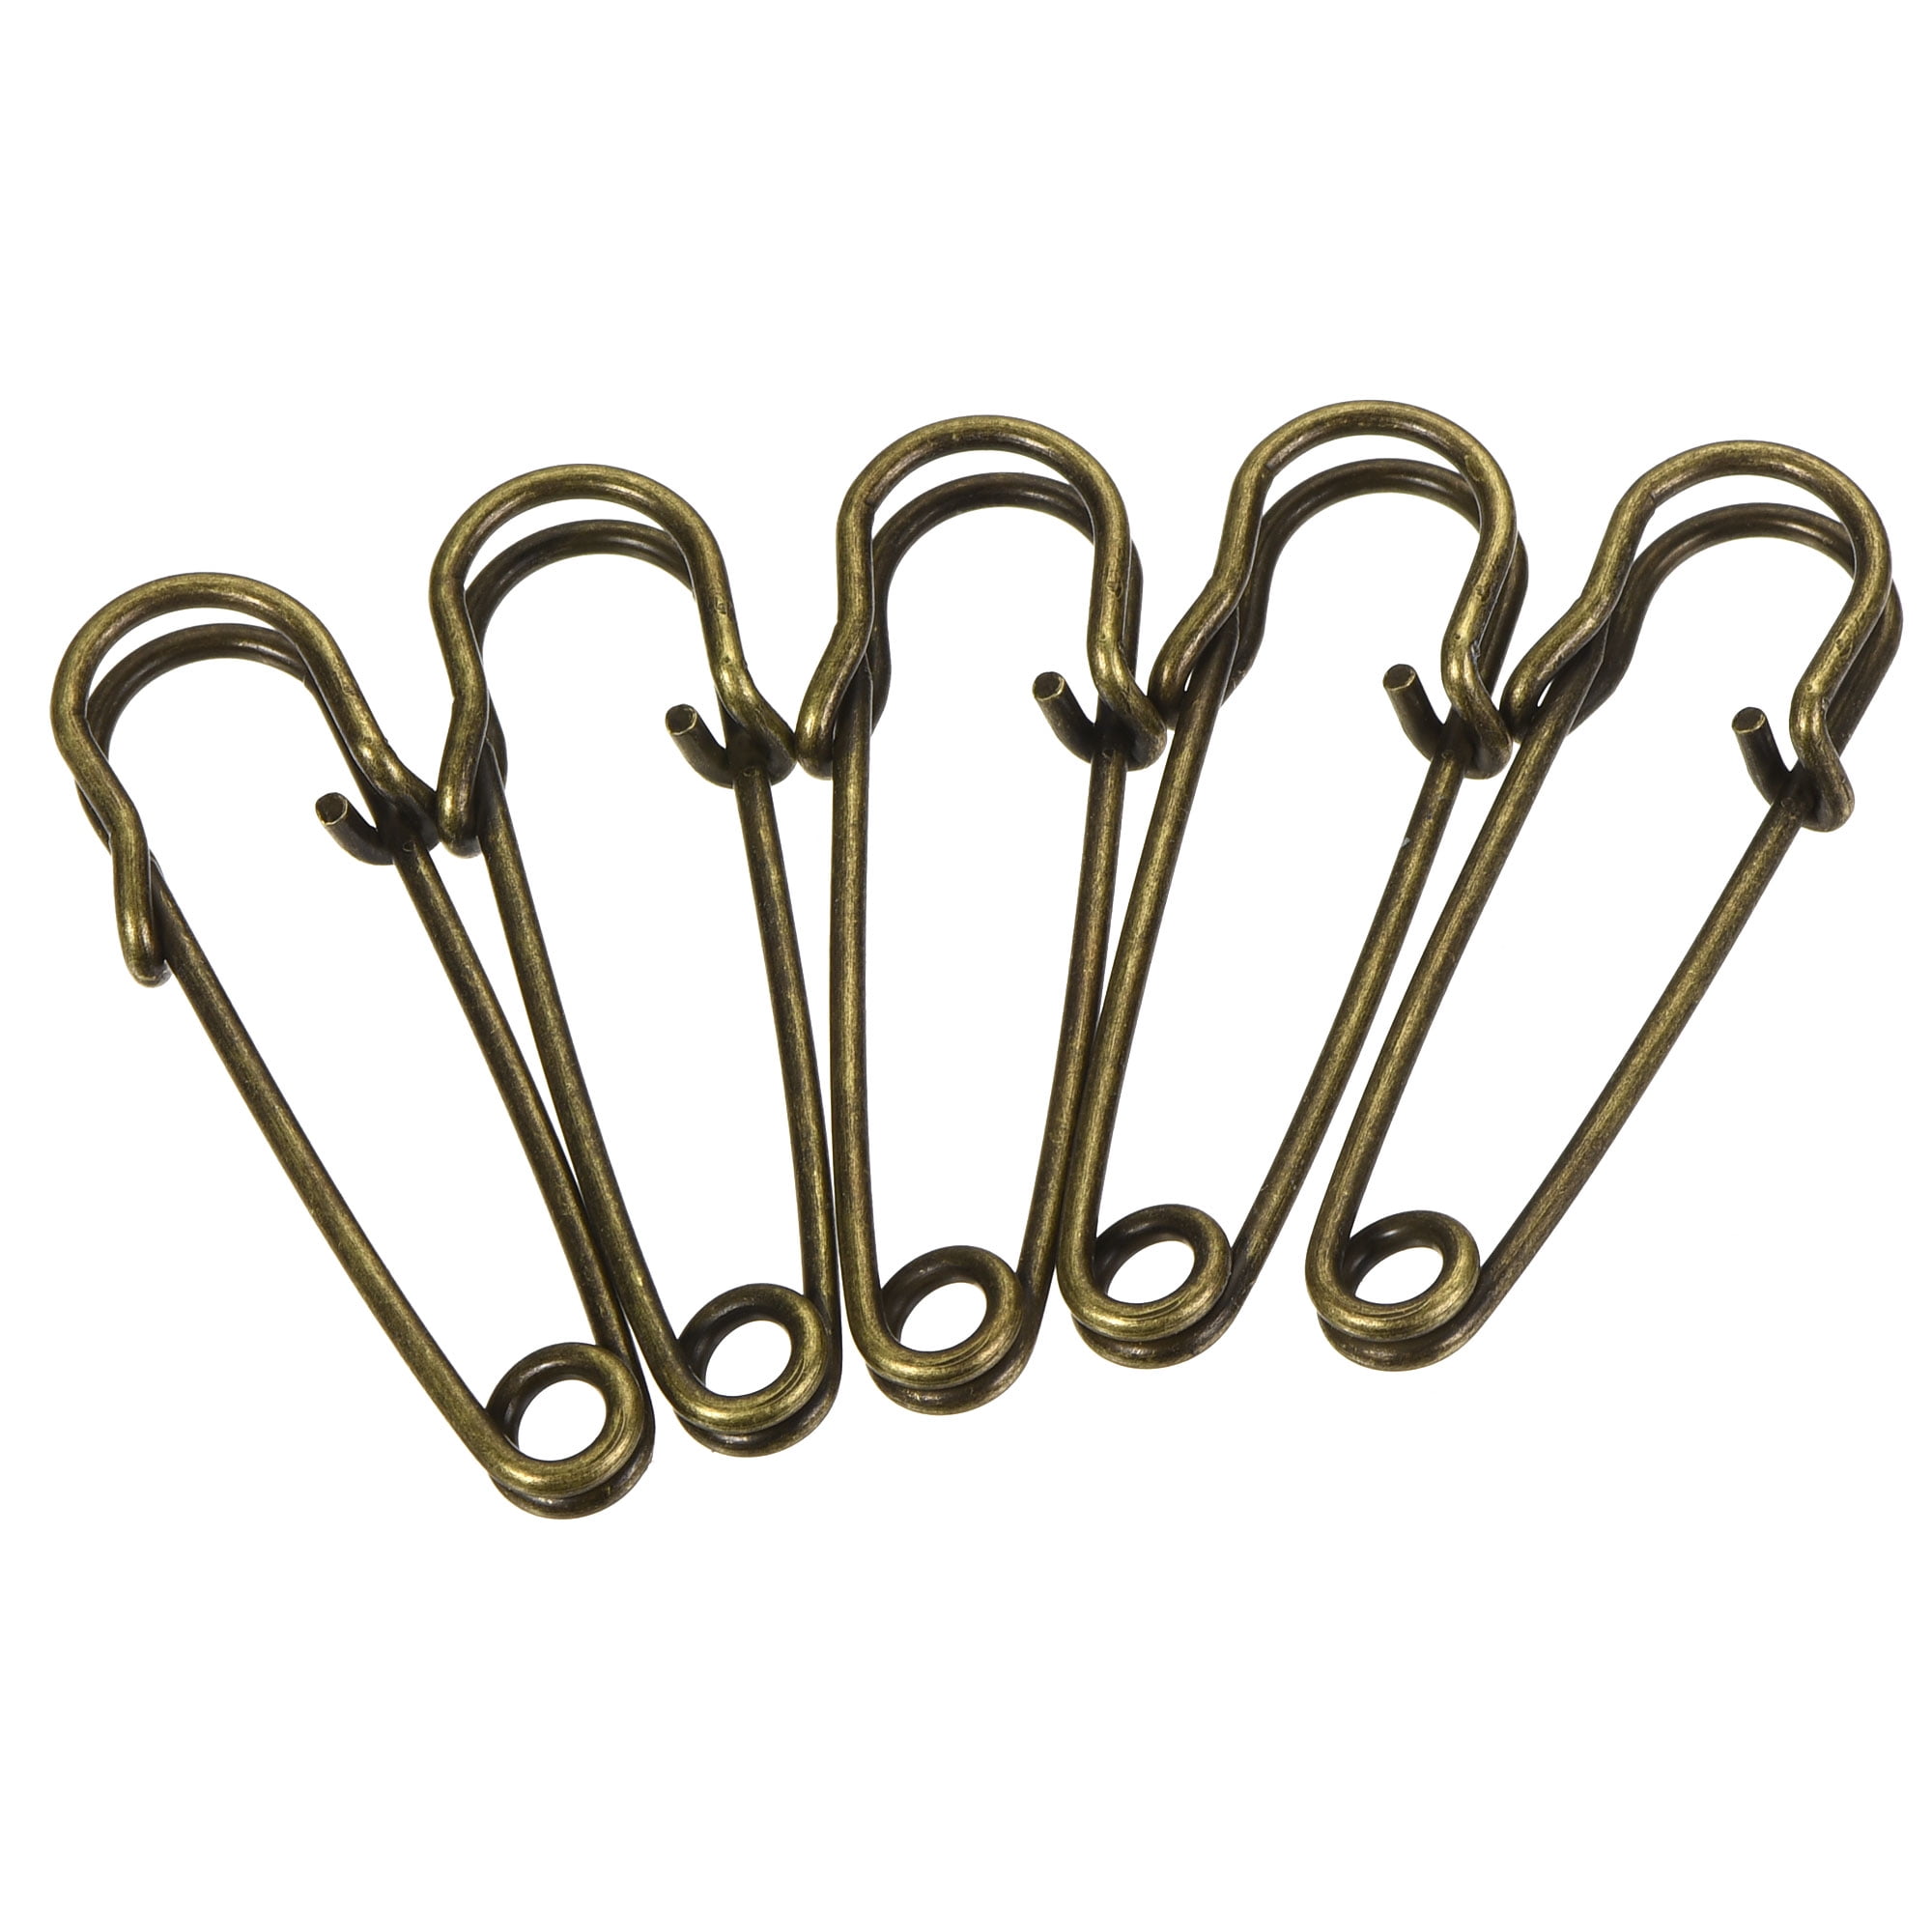  Honbay 12PCS Extra Large Safety Pins, 4 inch Safety Pins, Heavy  Duty Oversize Safety Pins, Blanket Pins - for Blankets, Sofas, Upholstery,  Sweaters, Scarves, Skirts, Kilts, Crafts, etc